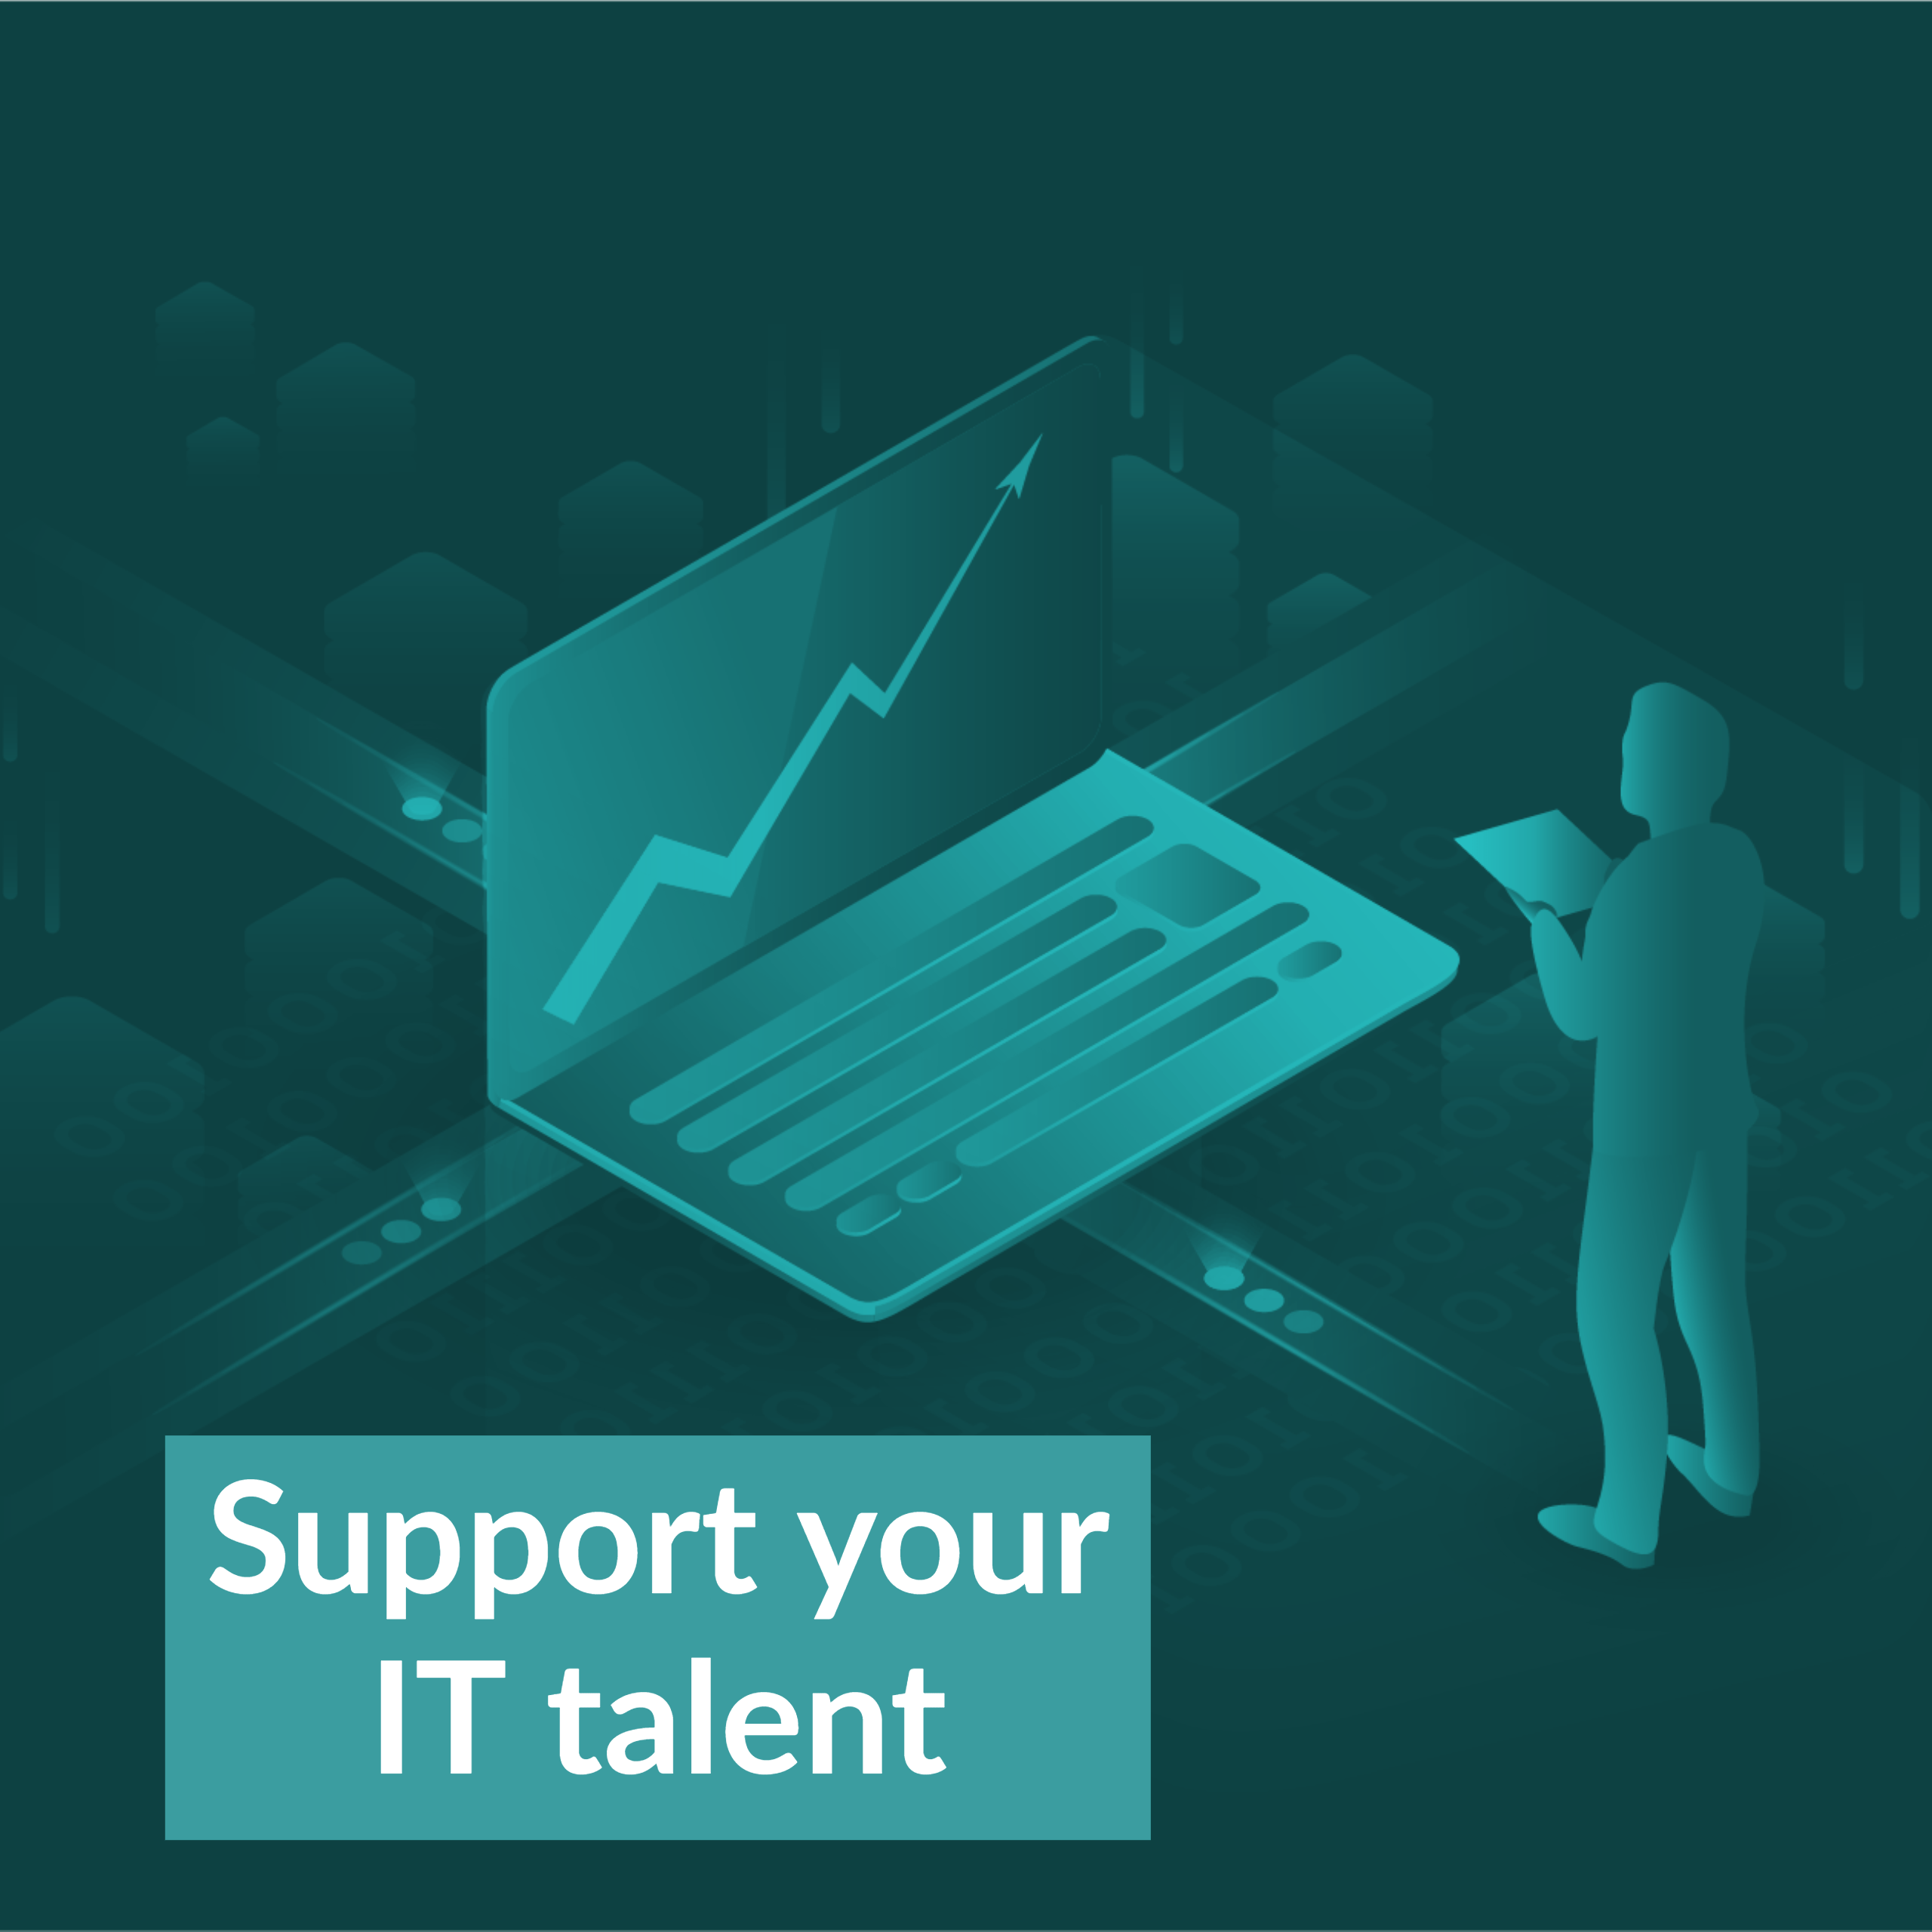 Resource Box How to Use Career Paths to Support Your IT Talent in a Changing Industry